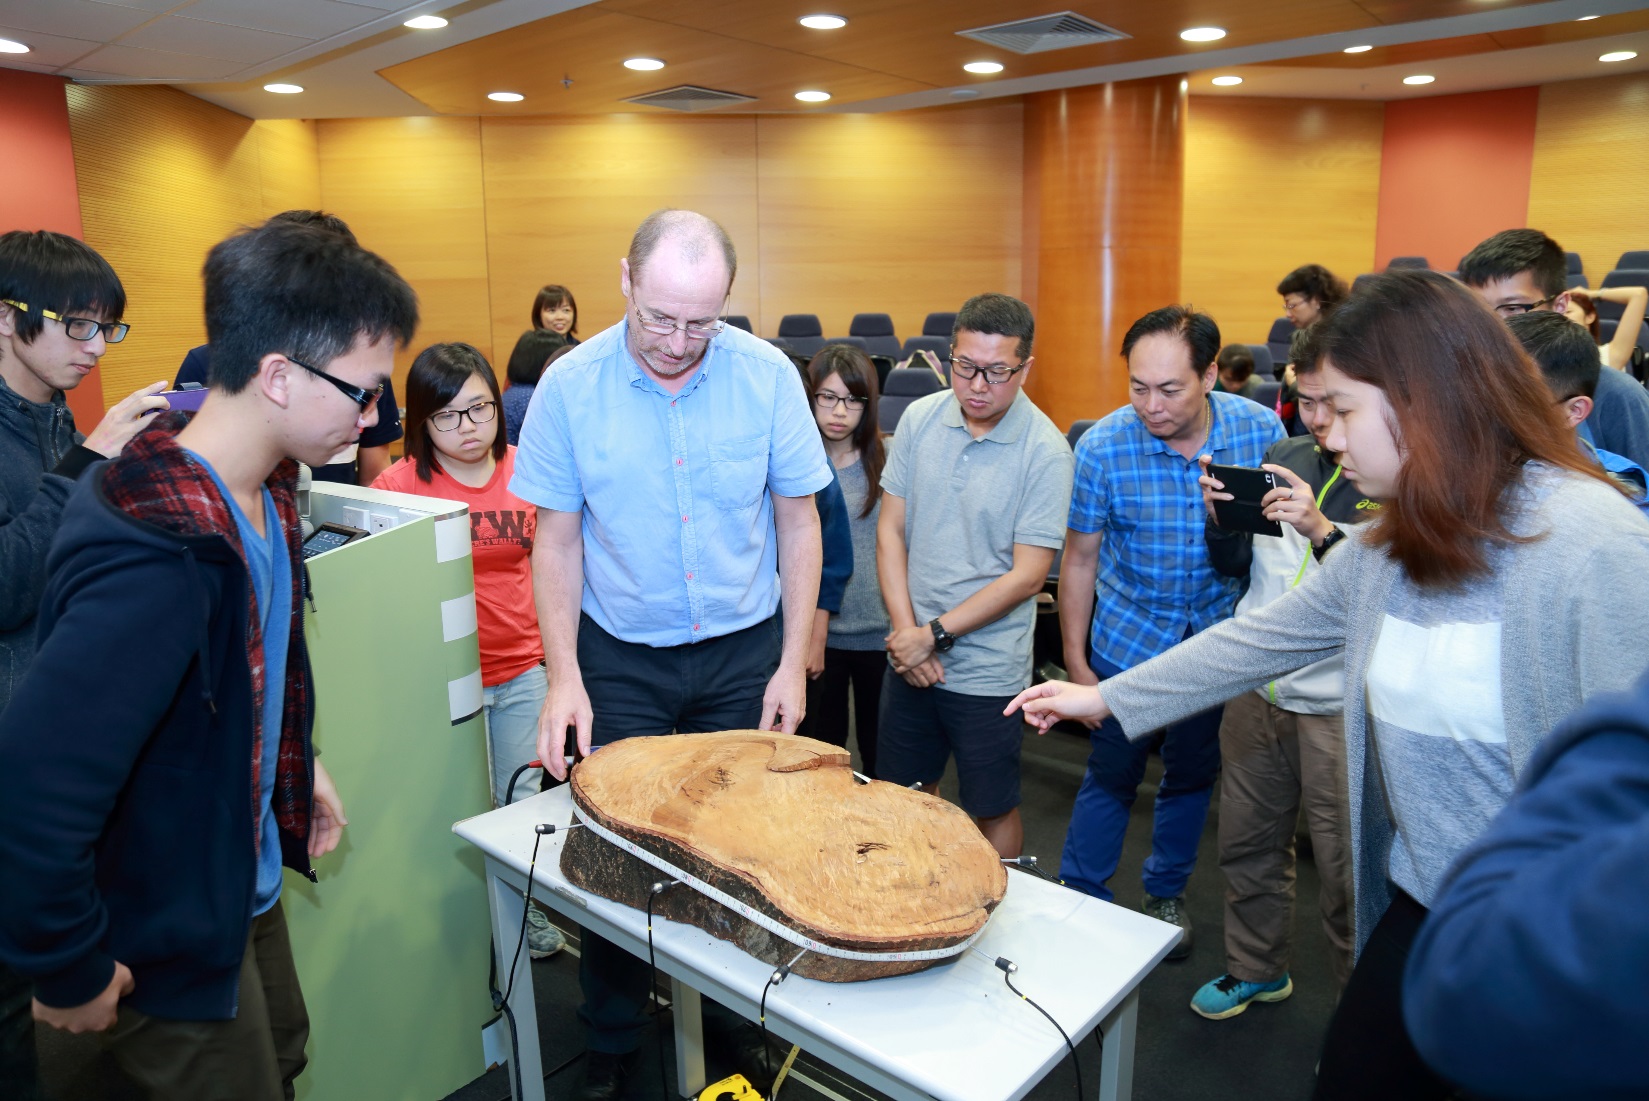 Mr. Anthony D. Pickering, Lecturer of CIE (centre) leading the demonstration on using a Picus Tomograph.